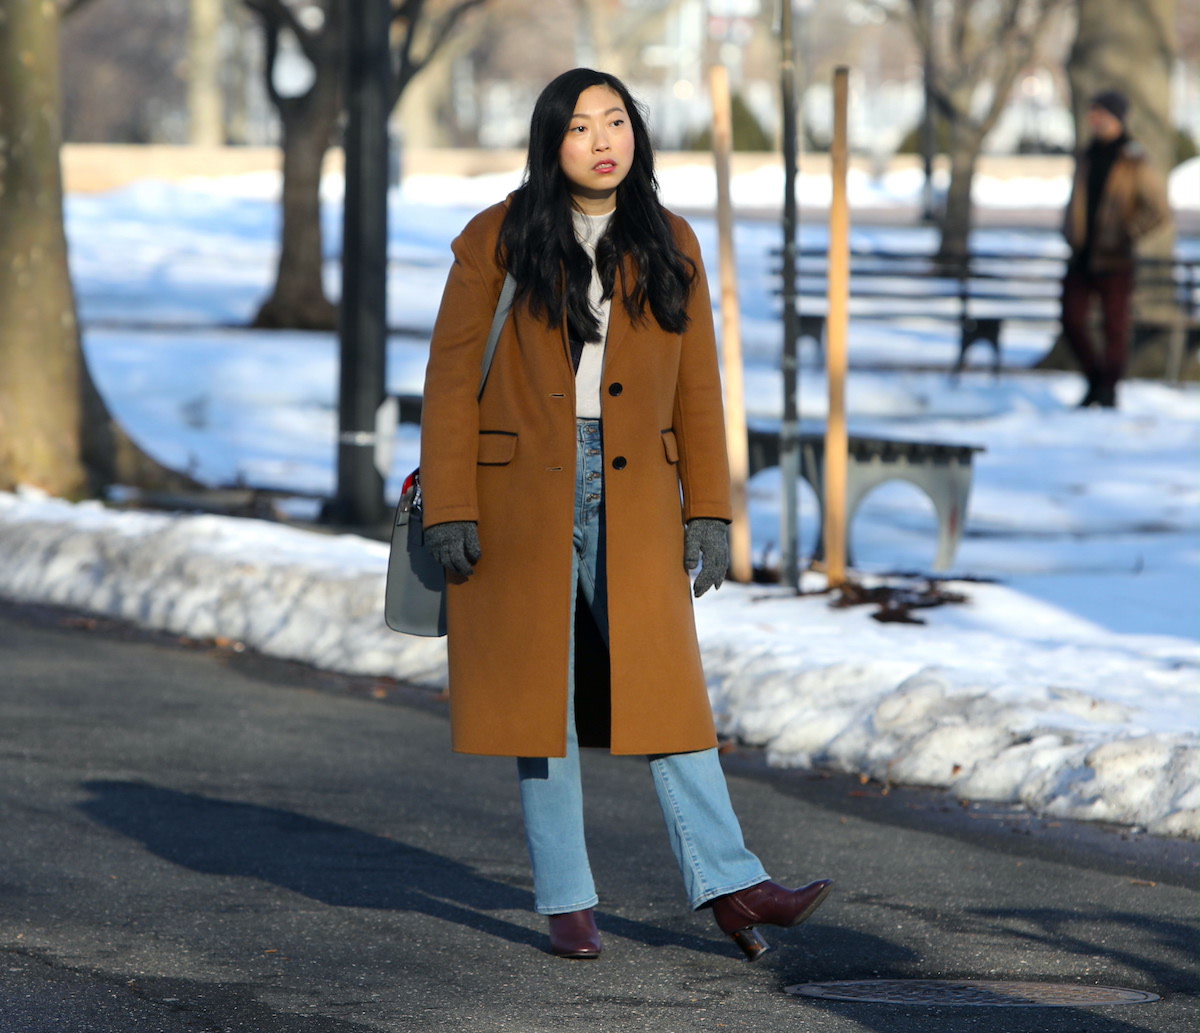 Awkwafina wears a brown coat and jeans as she looks on while filming a scene from 'Awkwafina Is Nora From Queens' in 2021